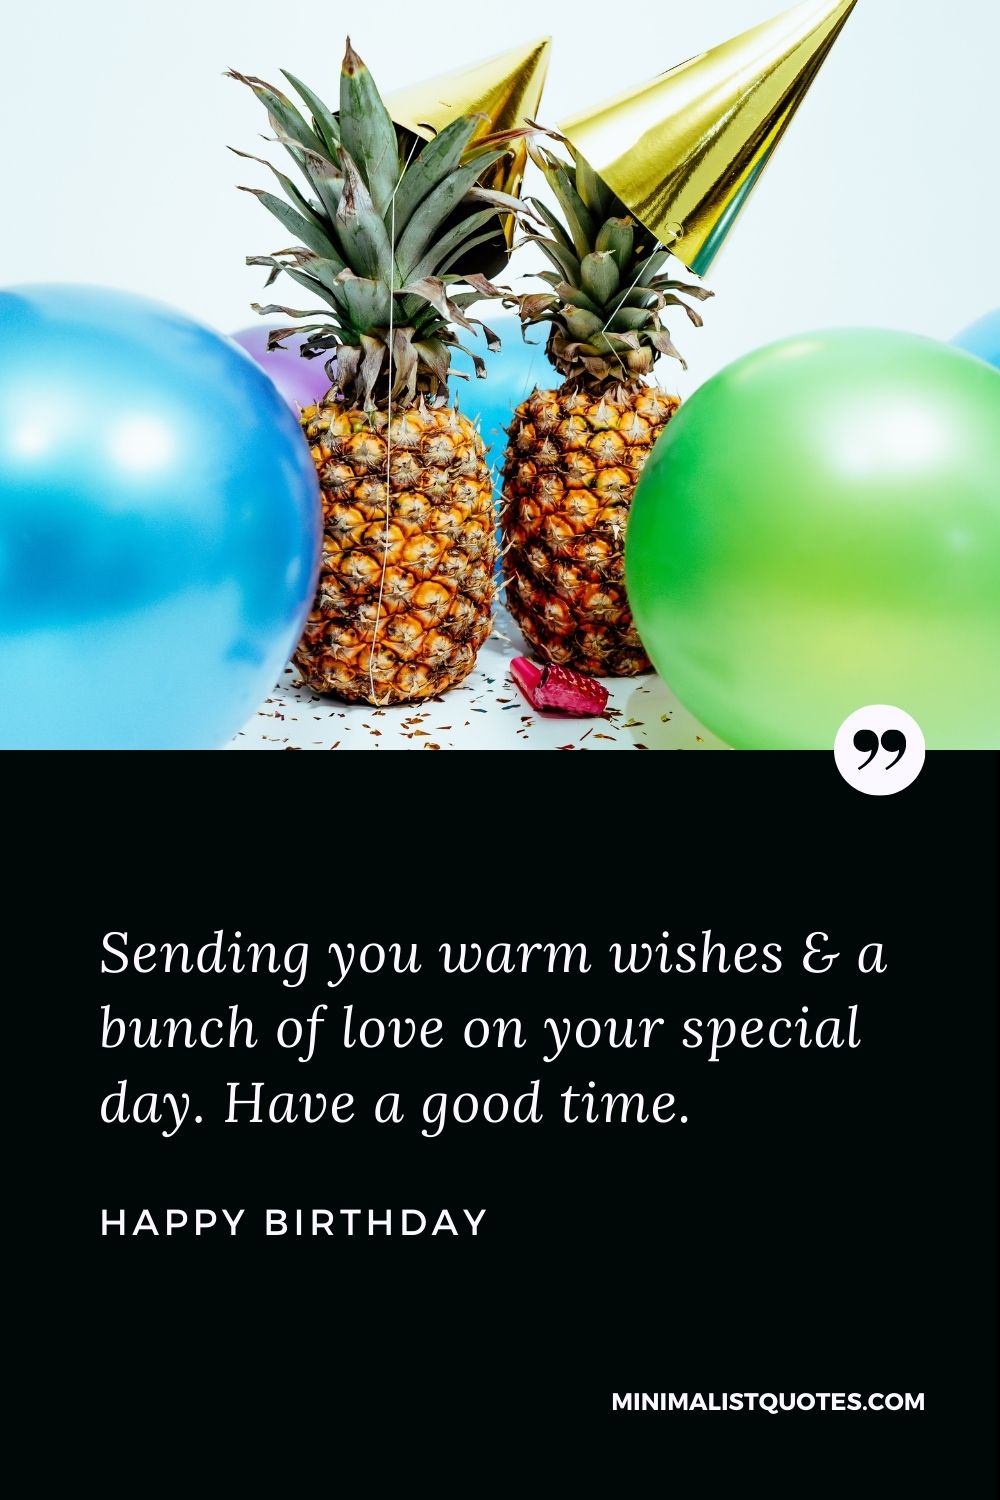 Happy Birthday Wishes - Sending you warm wishes & a bunch of love on your special day. Have a good time.